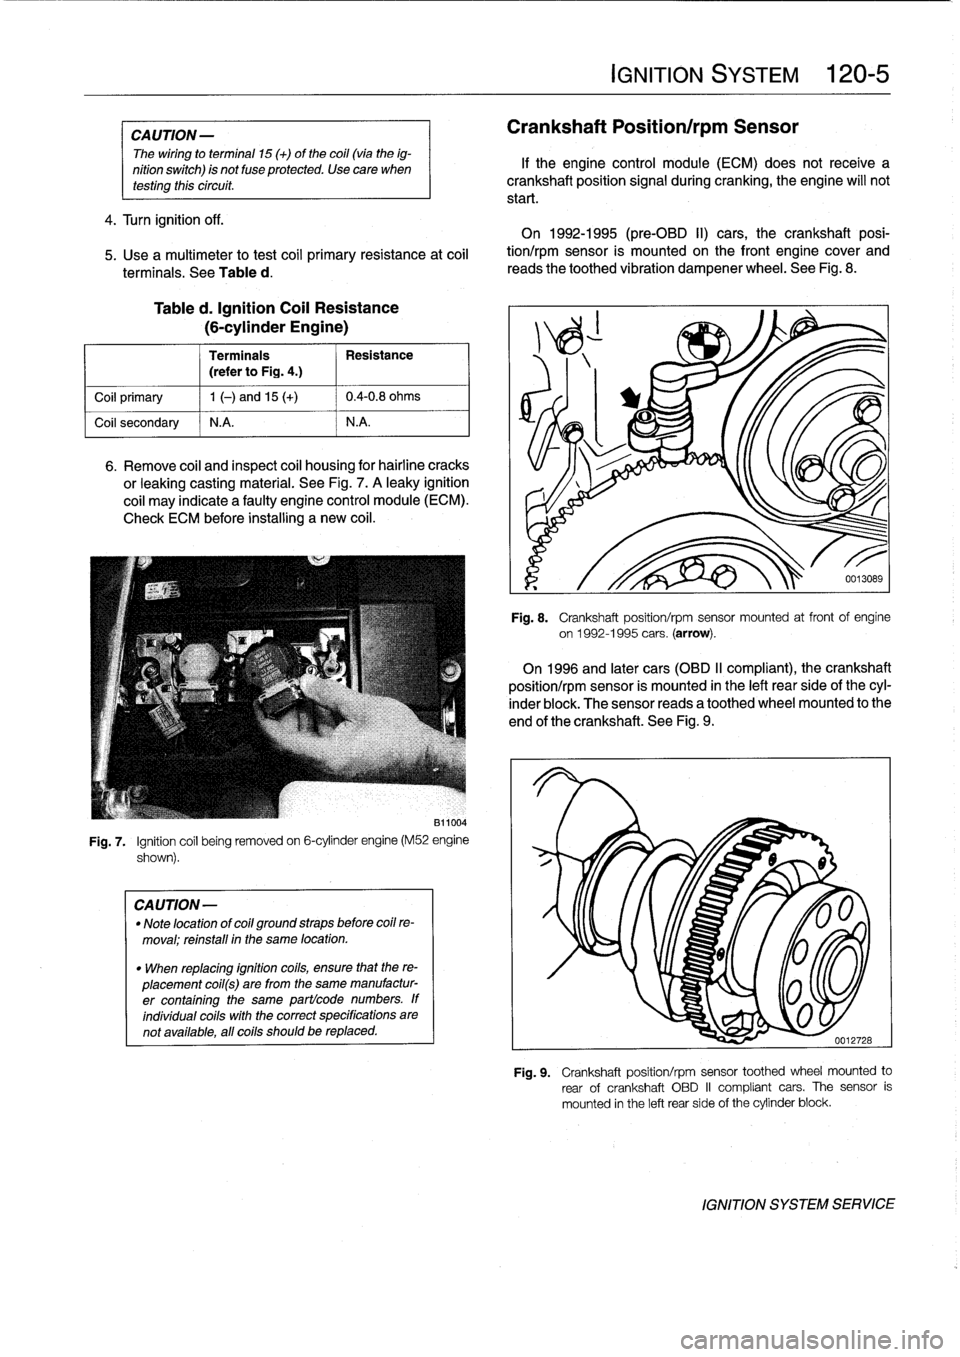 BMW M3 1996 E36 Workshop Manual 
CAUTION
-

The
wiring
to
termina¡
15
(+)
of
the
coil(vía
the
ig-

nition
switch)
is
not
fuse
protected
.
Use
care
when
testíng
thiscircuit
.

4
.
Turn
ignition
off
.

5
.
Use
a
multimeter
to
test
